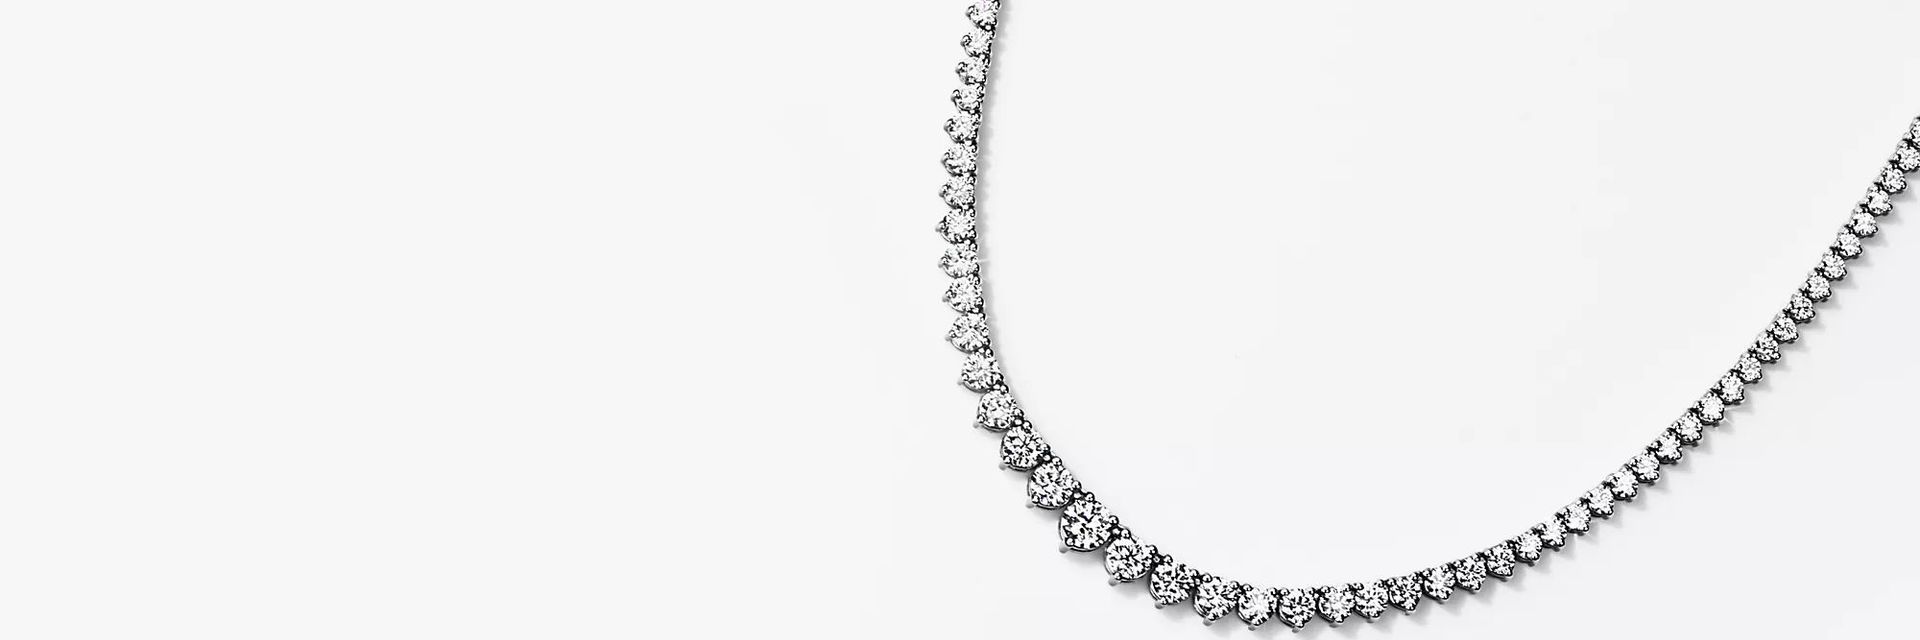 Eternity graduated diamond necklace in 18k white gold.